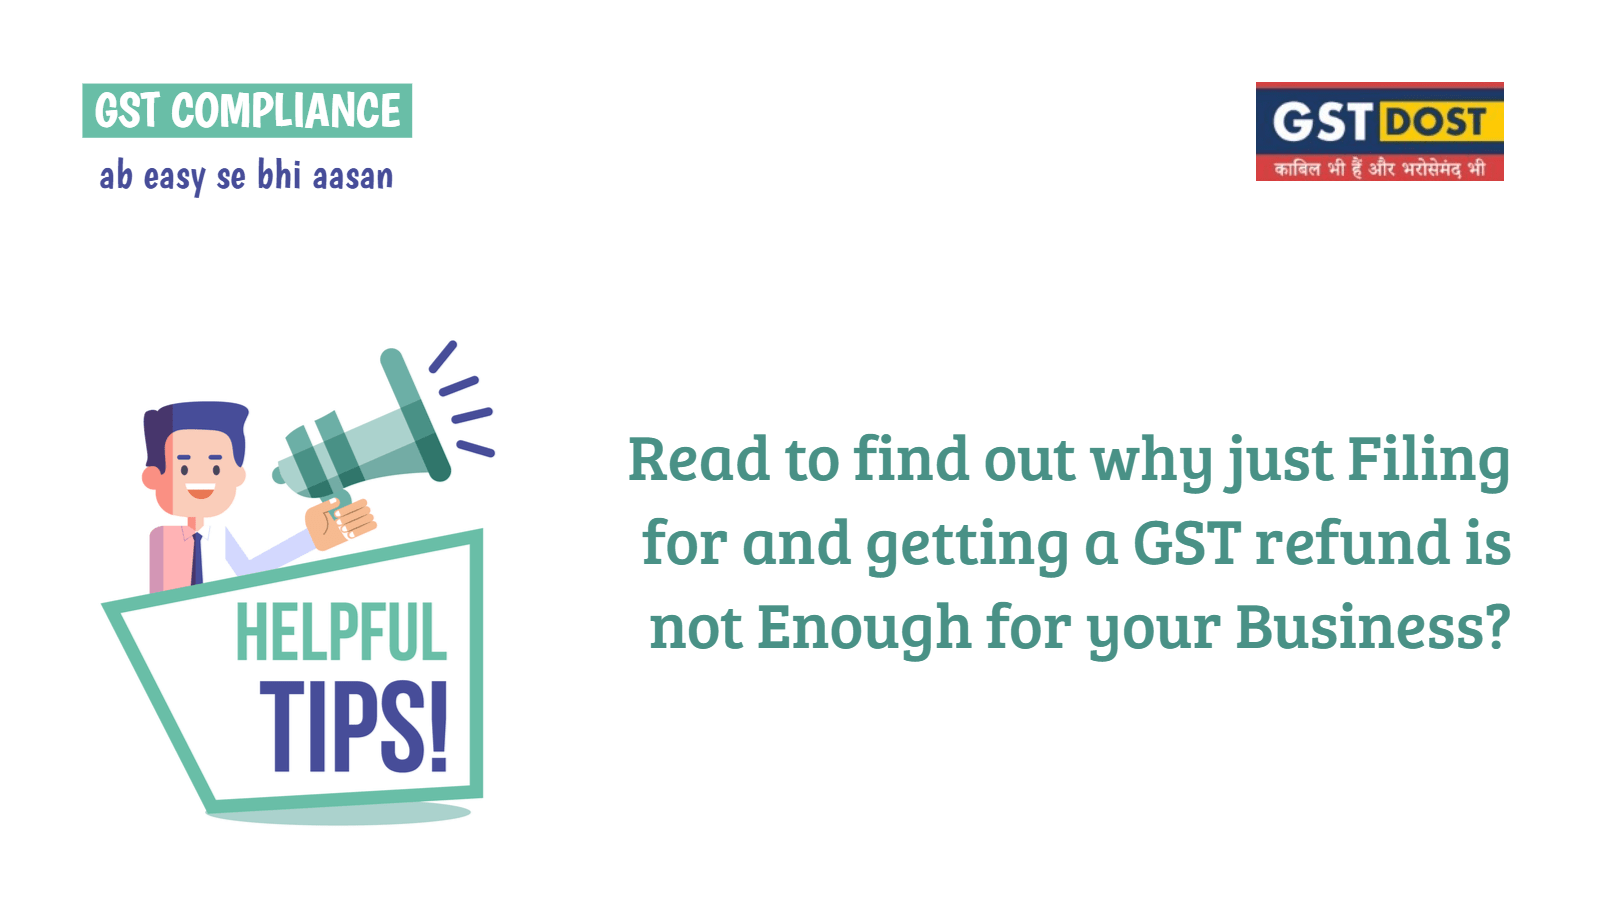 Read to find out why just Filing for and getting a GST refund is not Enough for your Business?